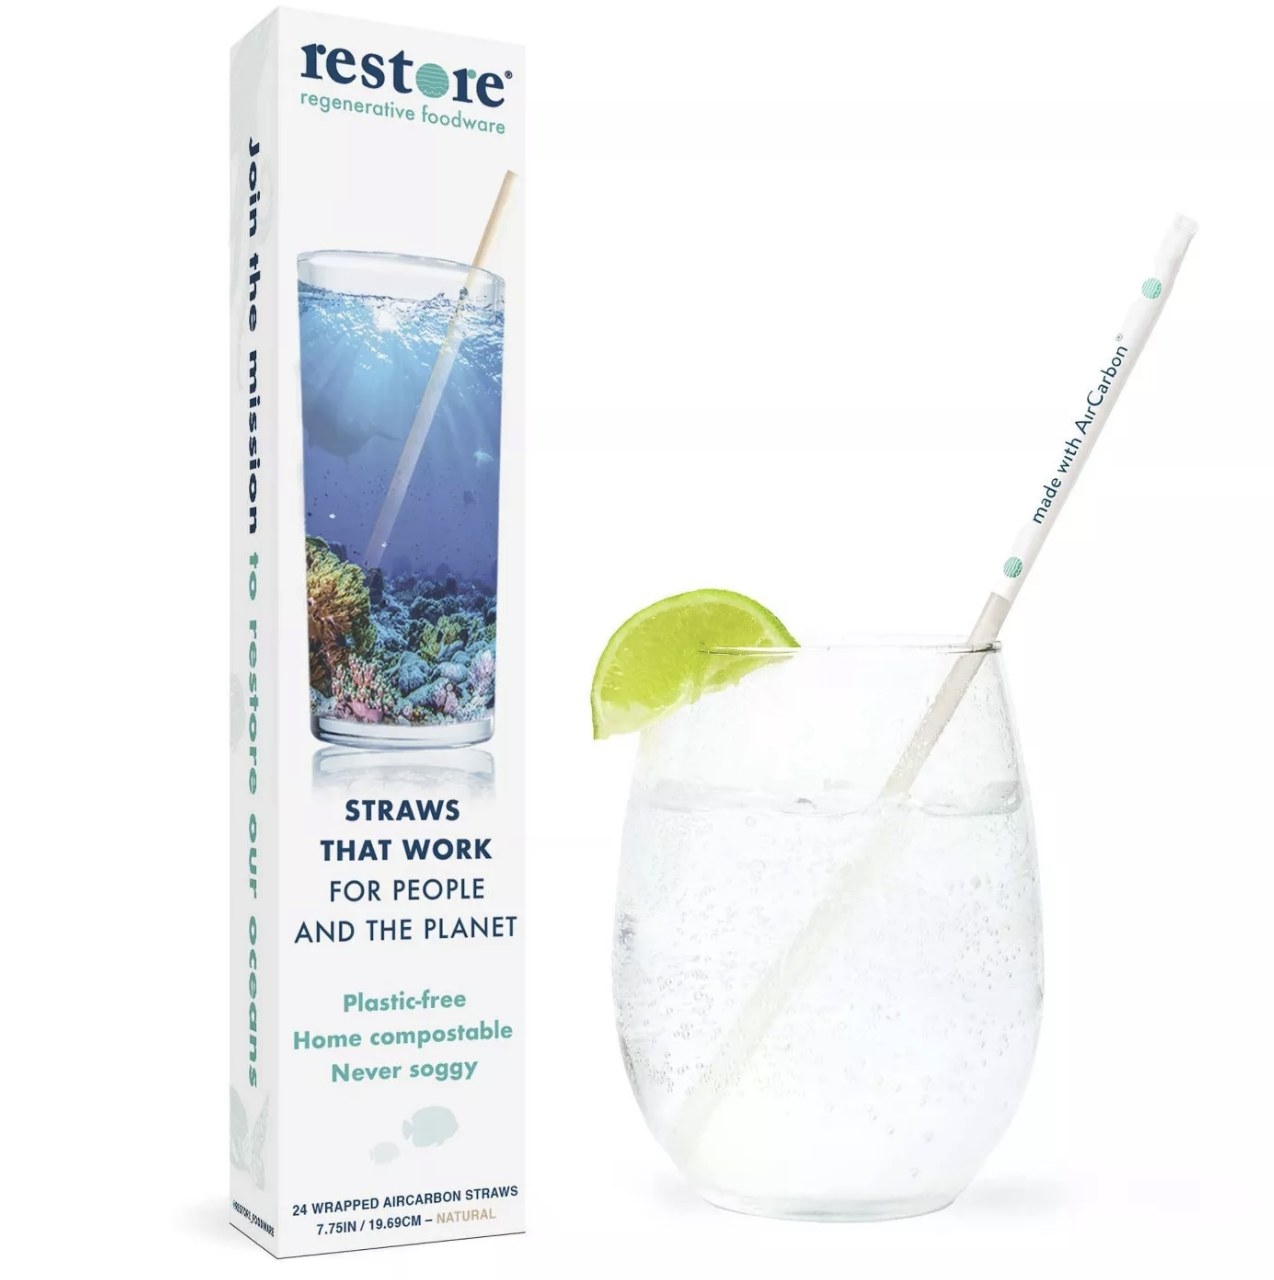 The straw says &quot;made with AirCarbon&quot; and is in a fizzy drink with a lime next to a package of the straws that says &quot;restore regenerative foodware&quot;